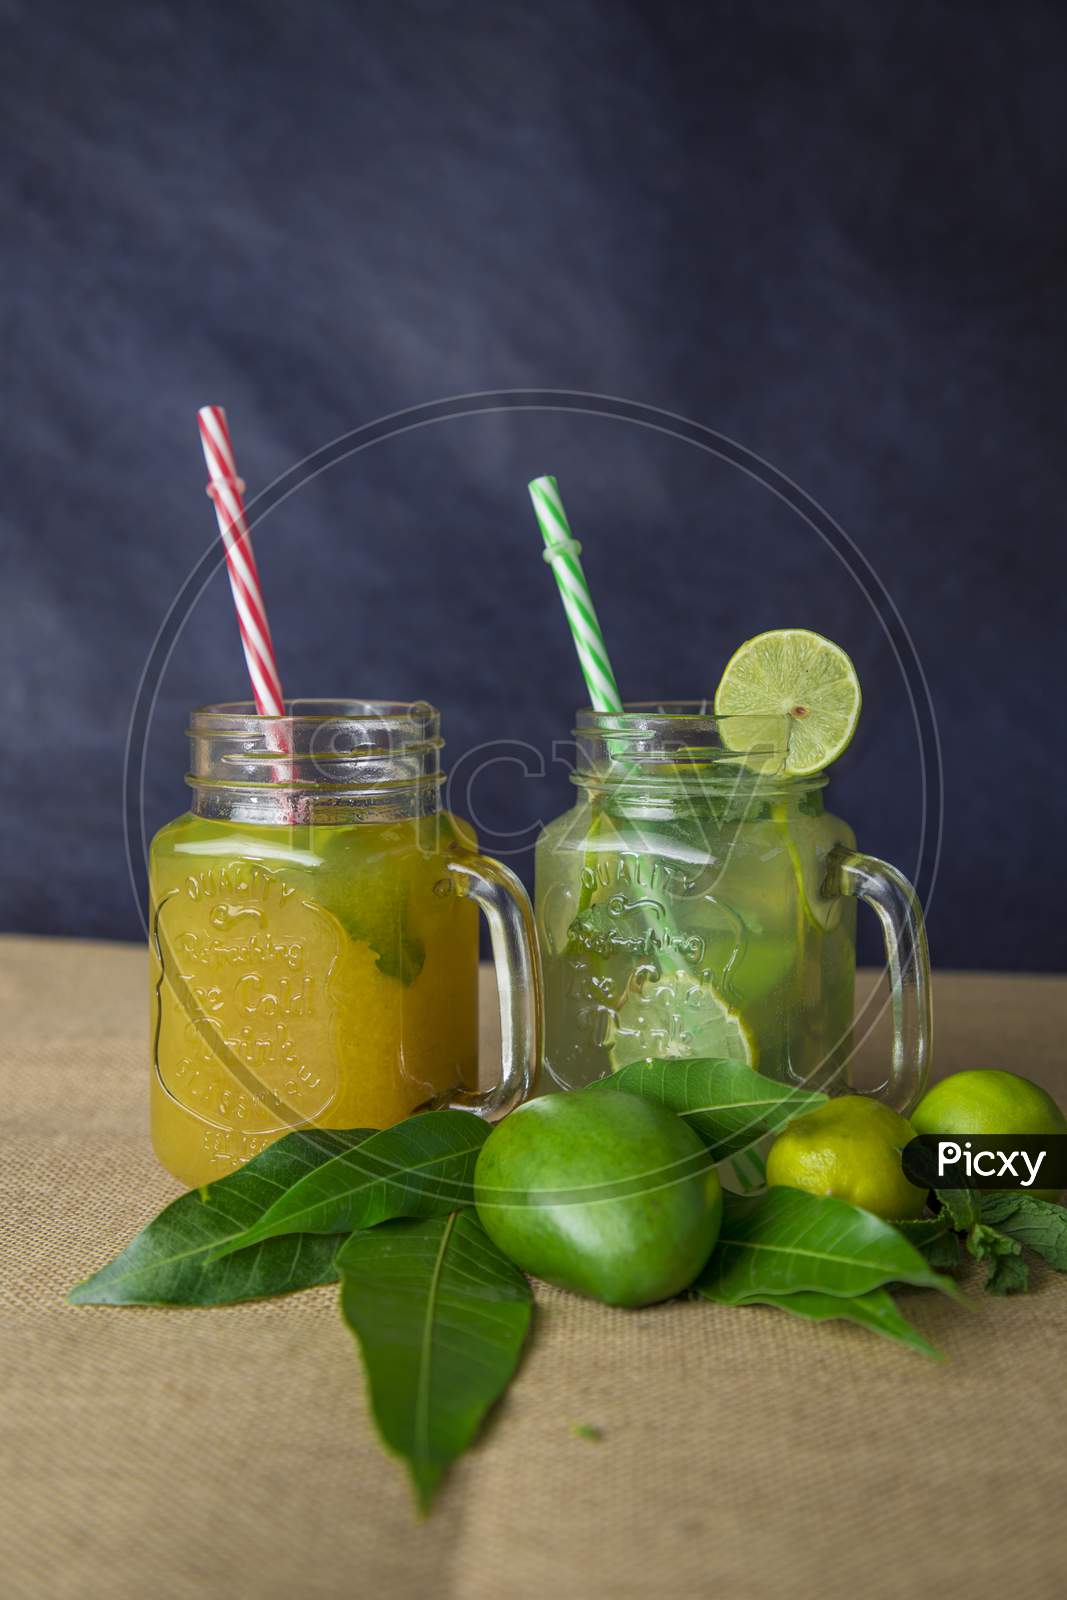 Kairi panha or Raw mango drink and lemon juice is a traditional indian summer beverage served in glass